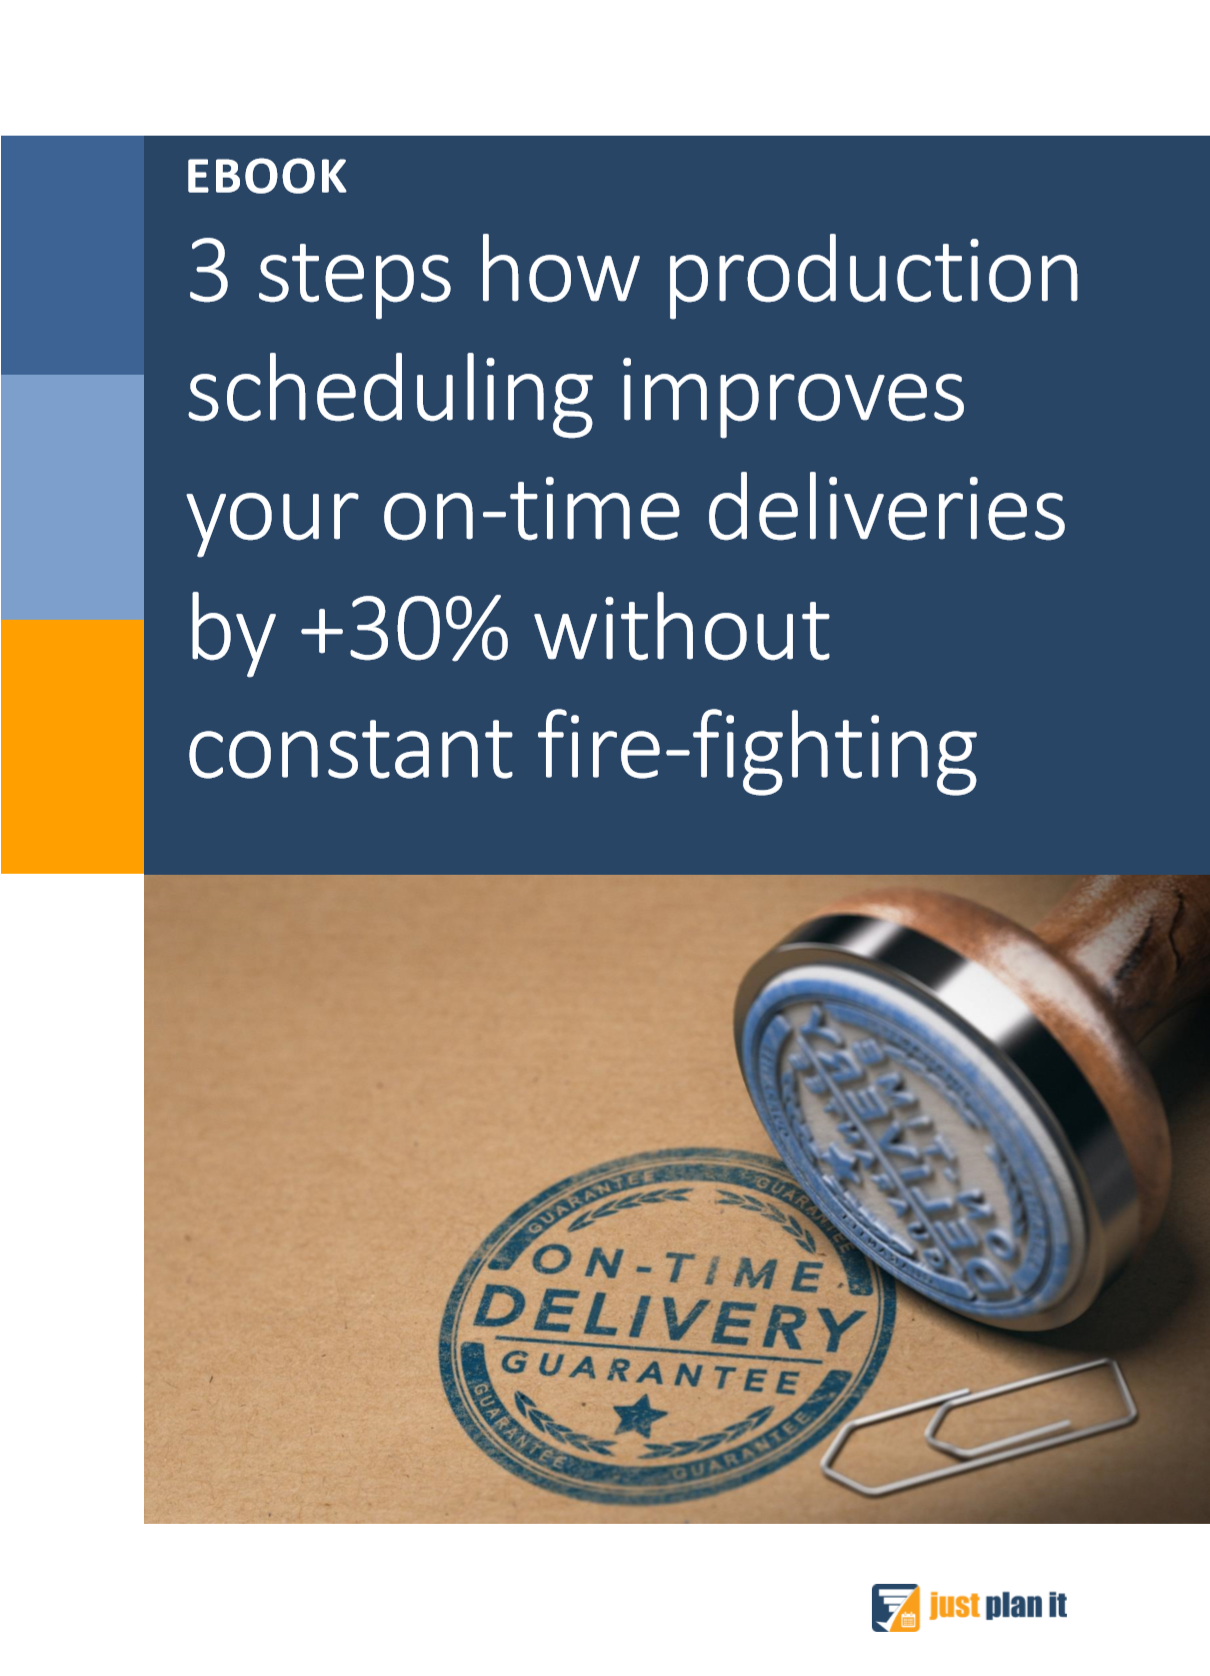 Ebook 3 Steps to Improve On-Time Deliveries_Title